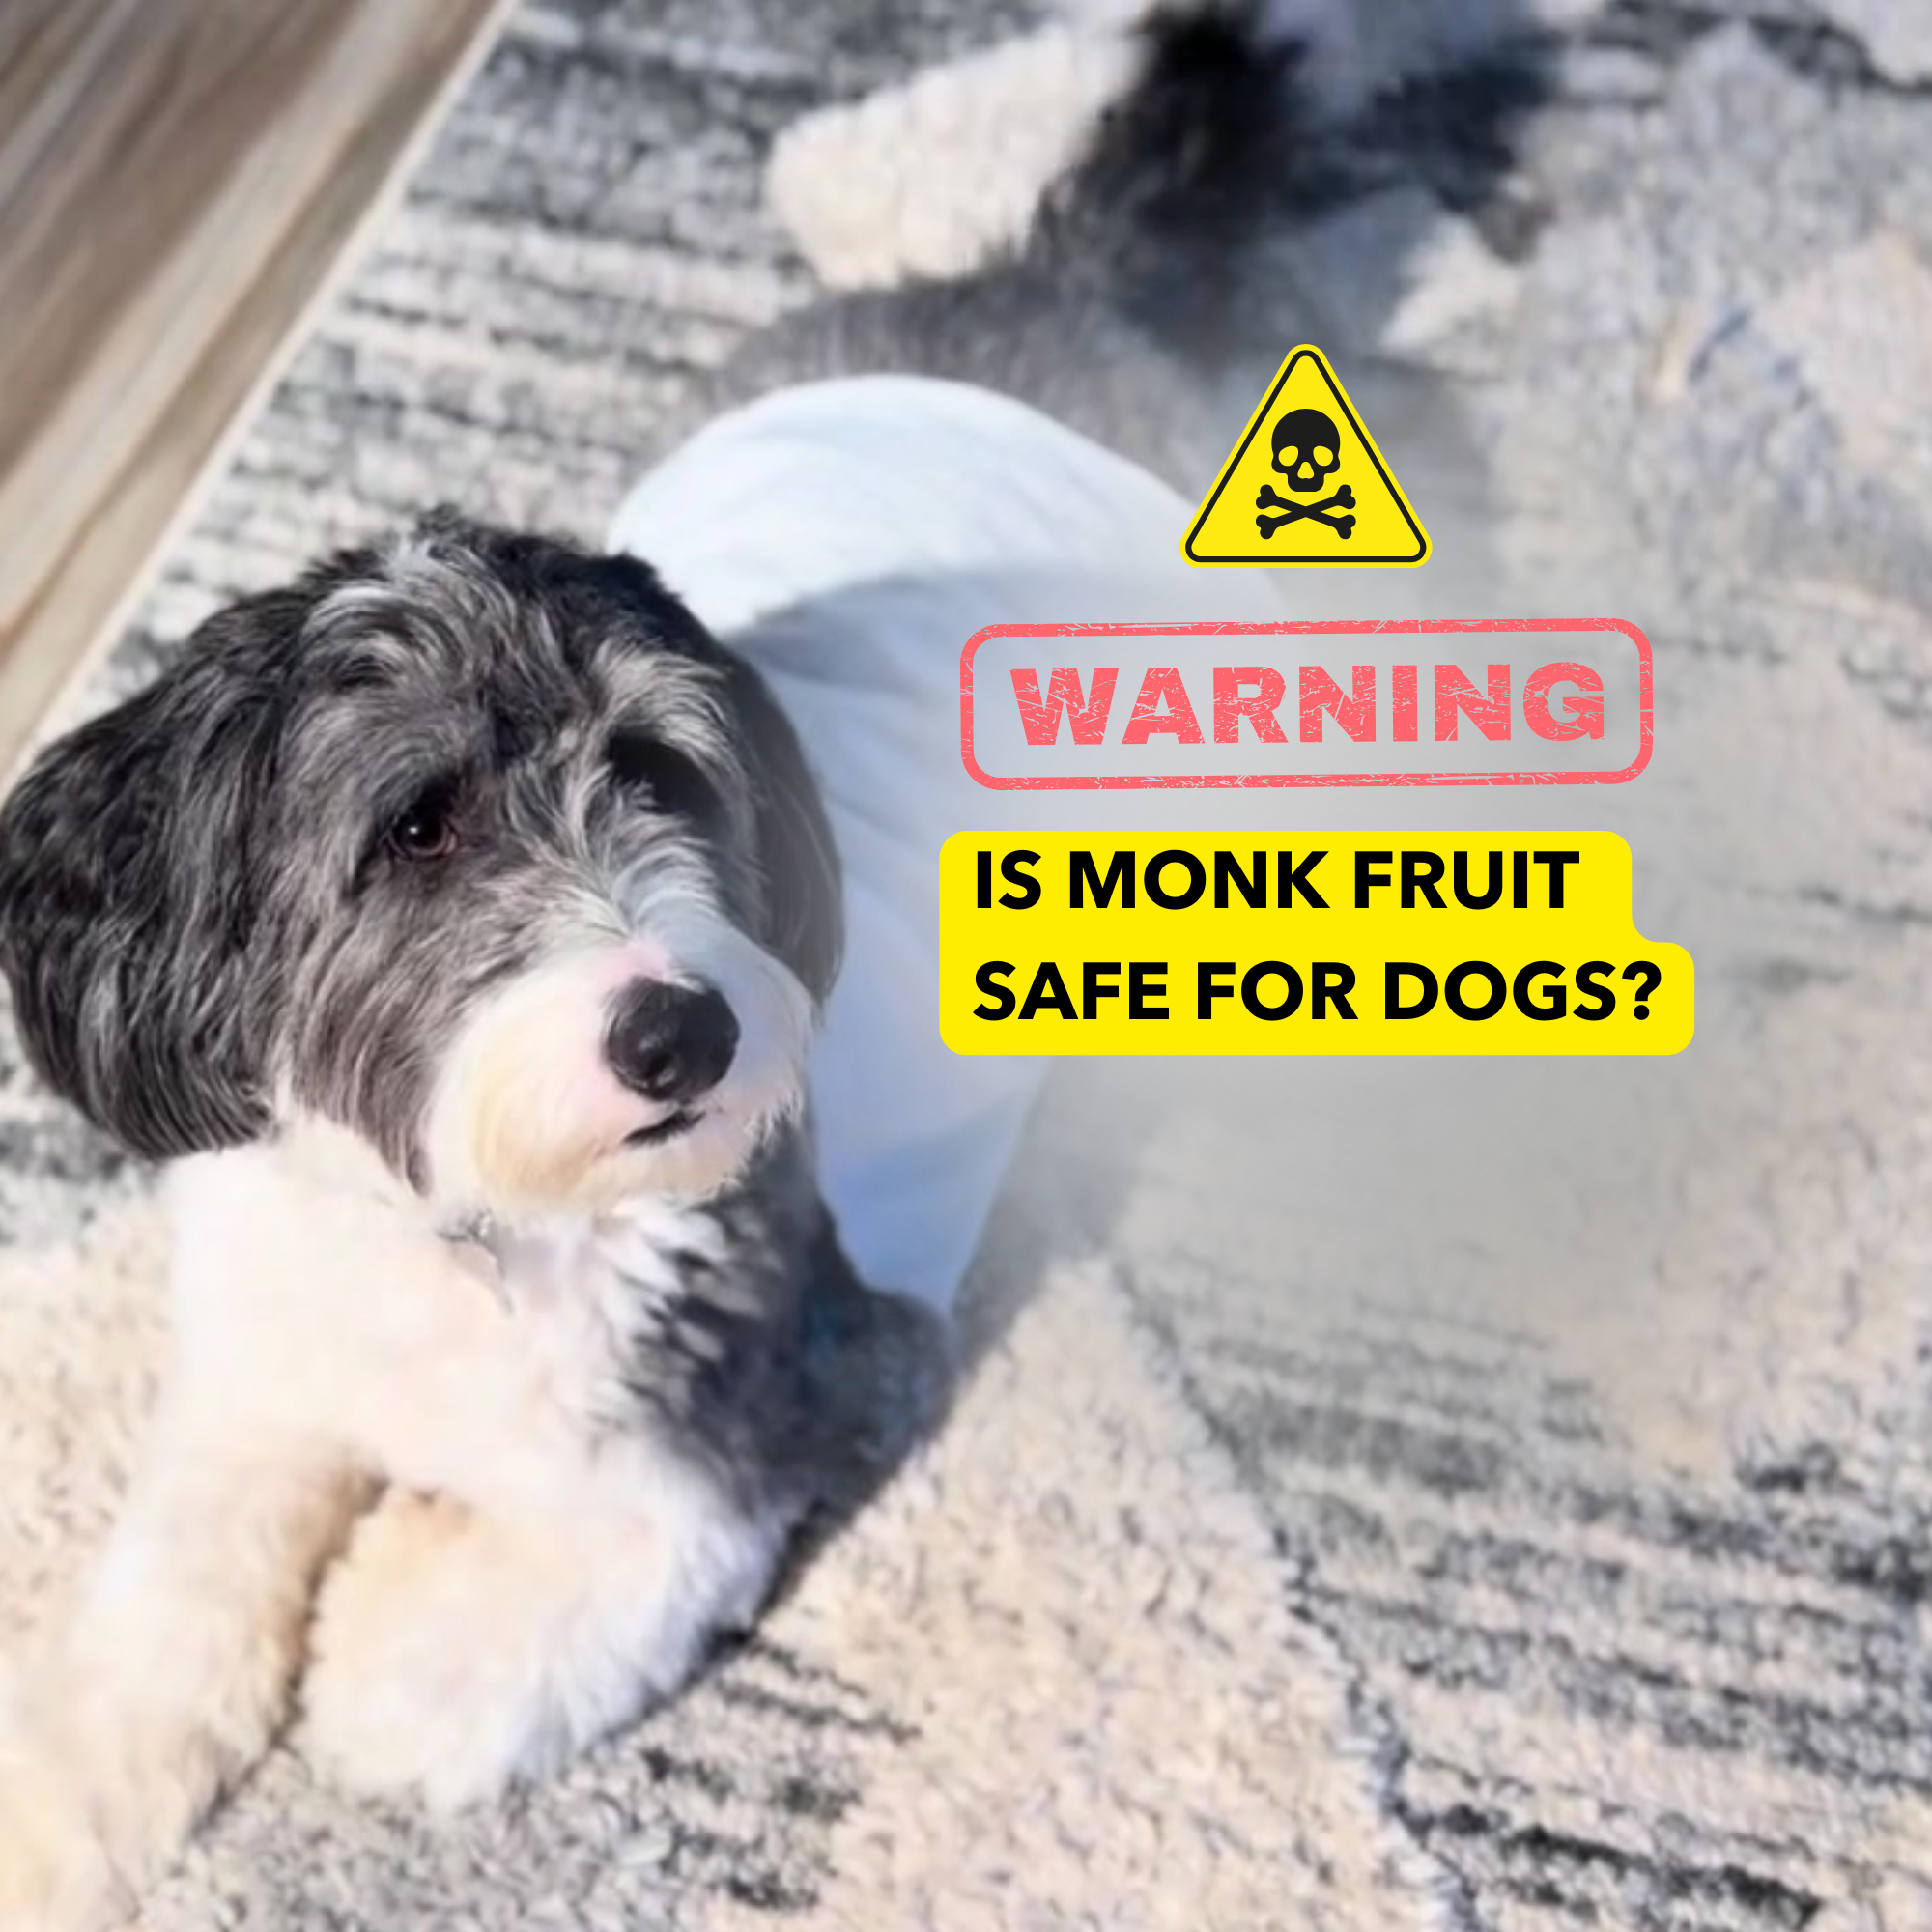 Is Monk Fruit with Erythritol Safe for Dogs?